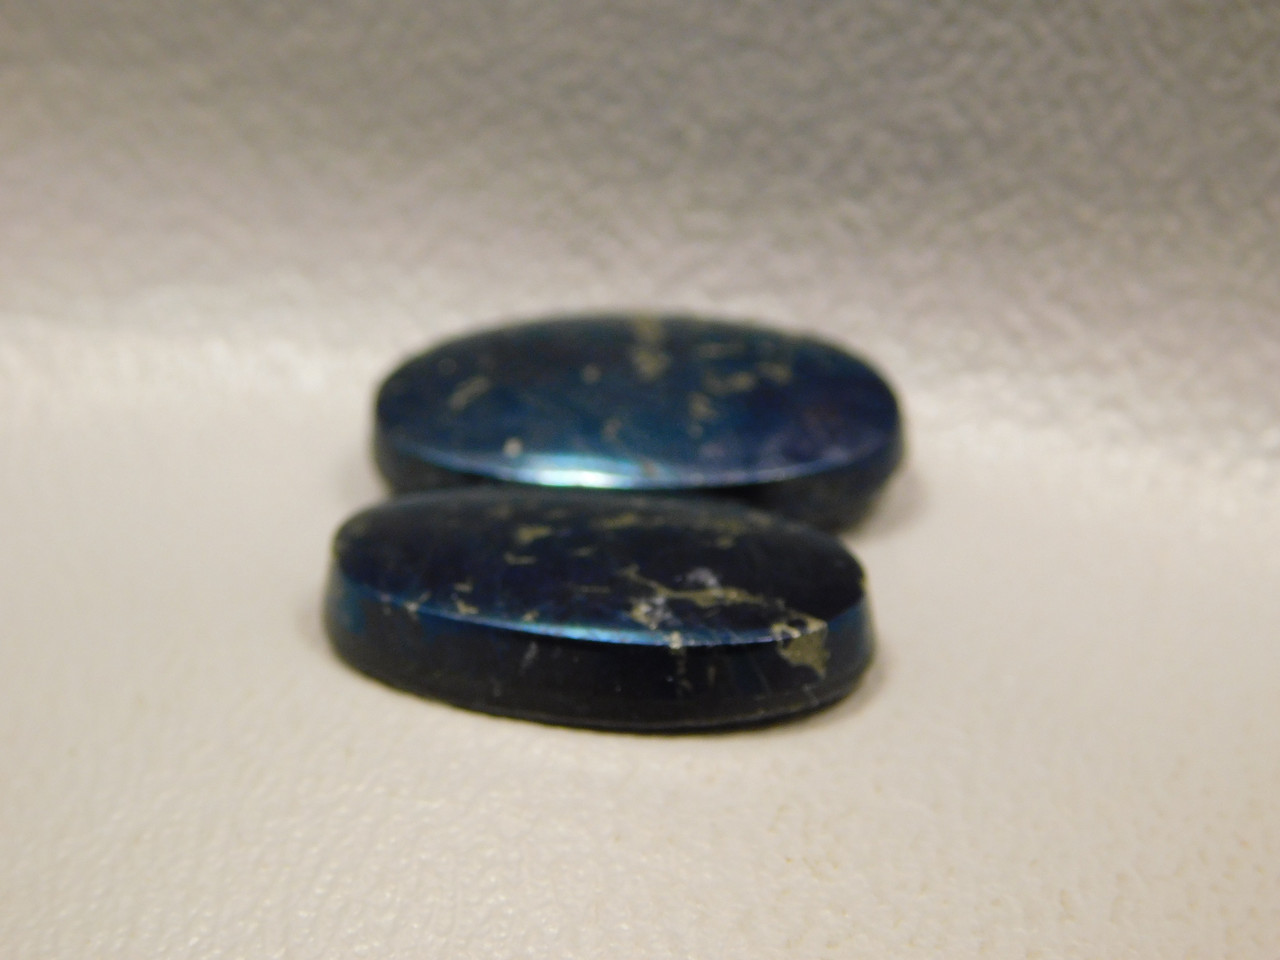 Blue Covellite Gold Pyrite Stones Cabochons
Matched Pairs #24